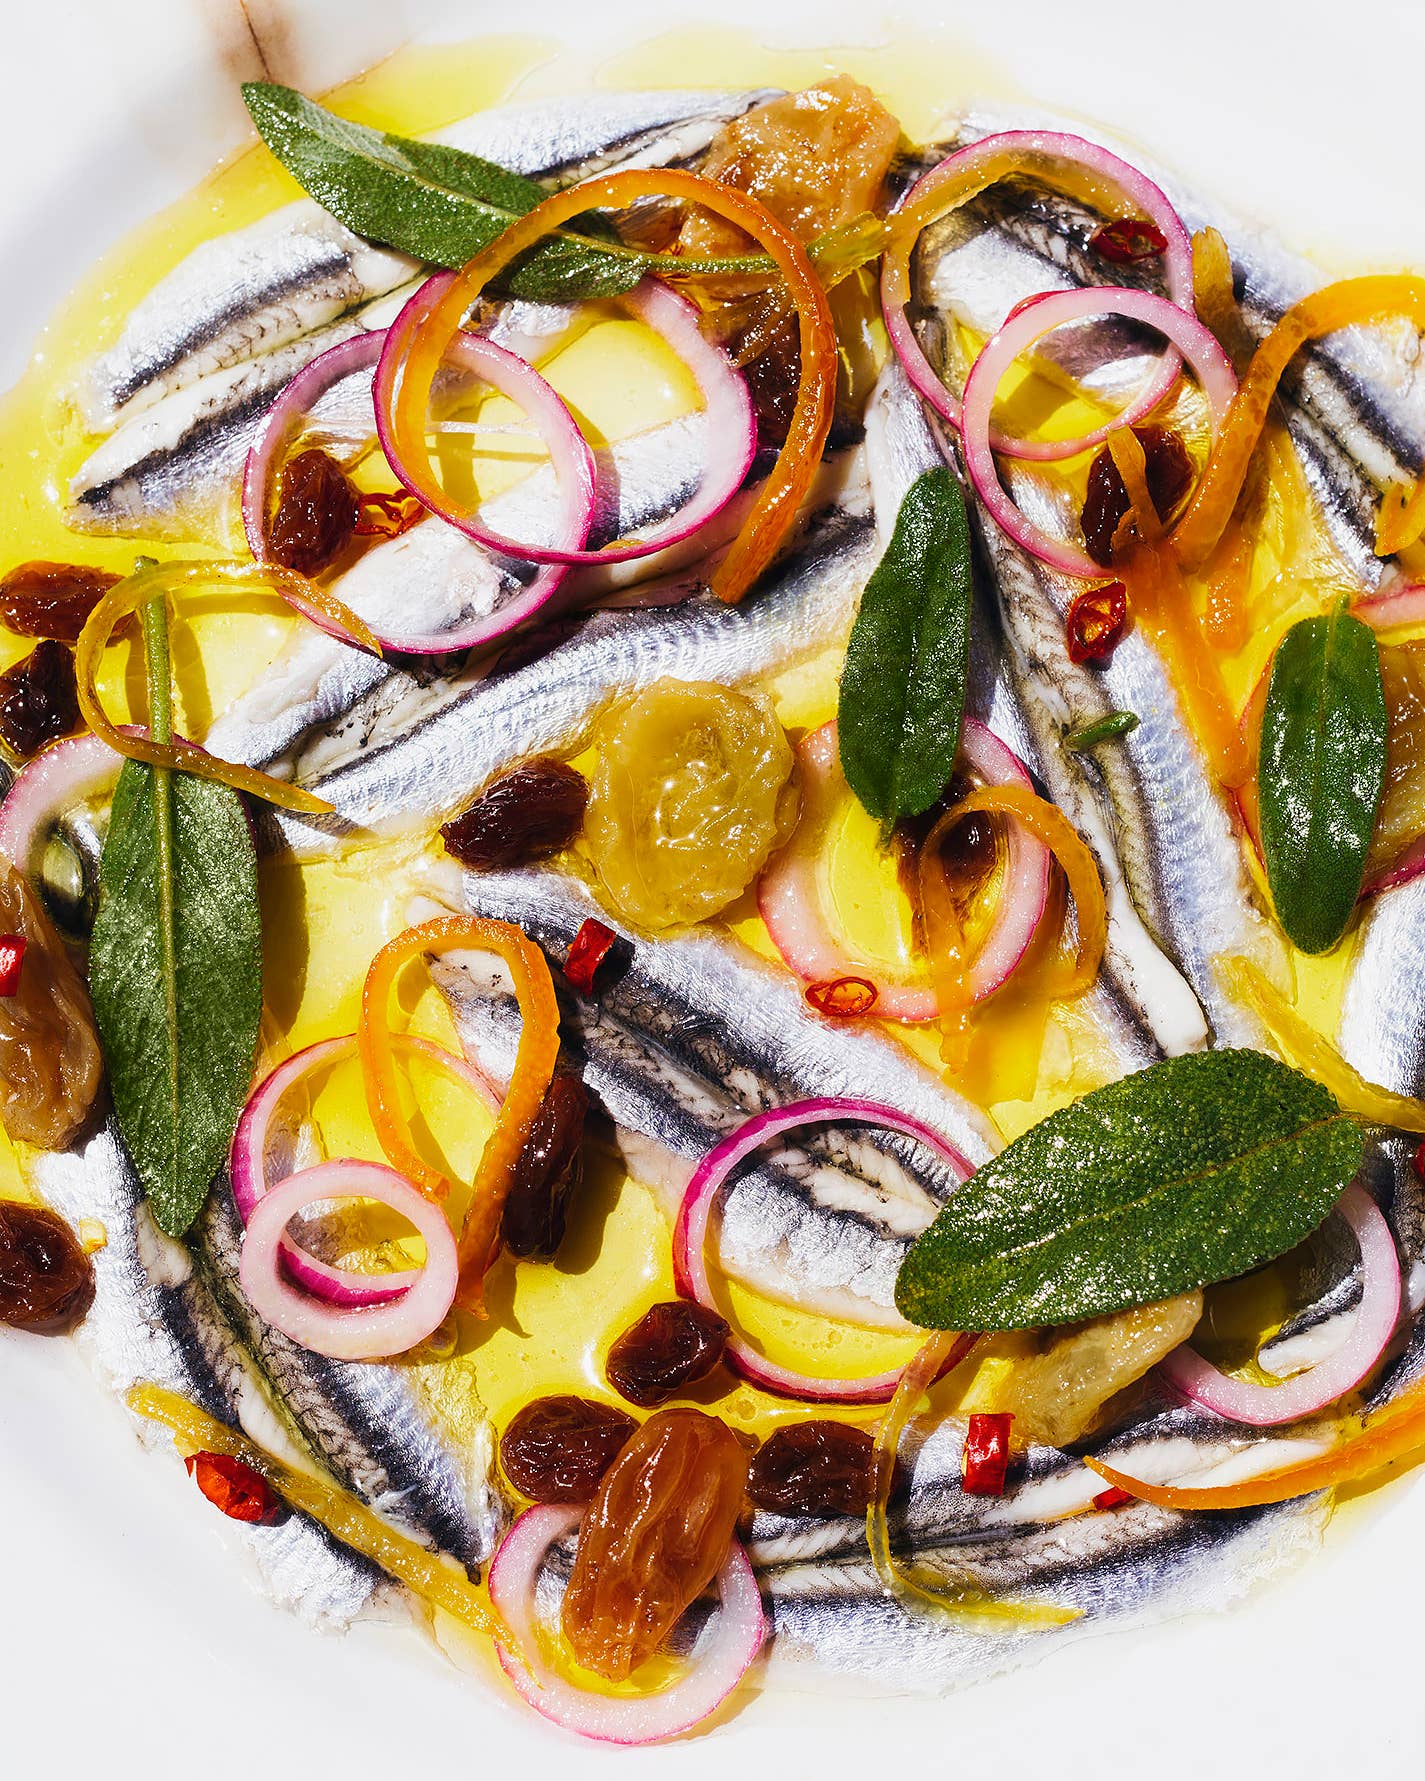 Anchovy recipes